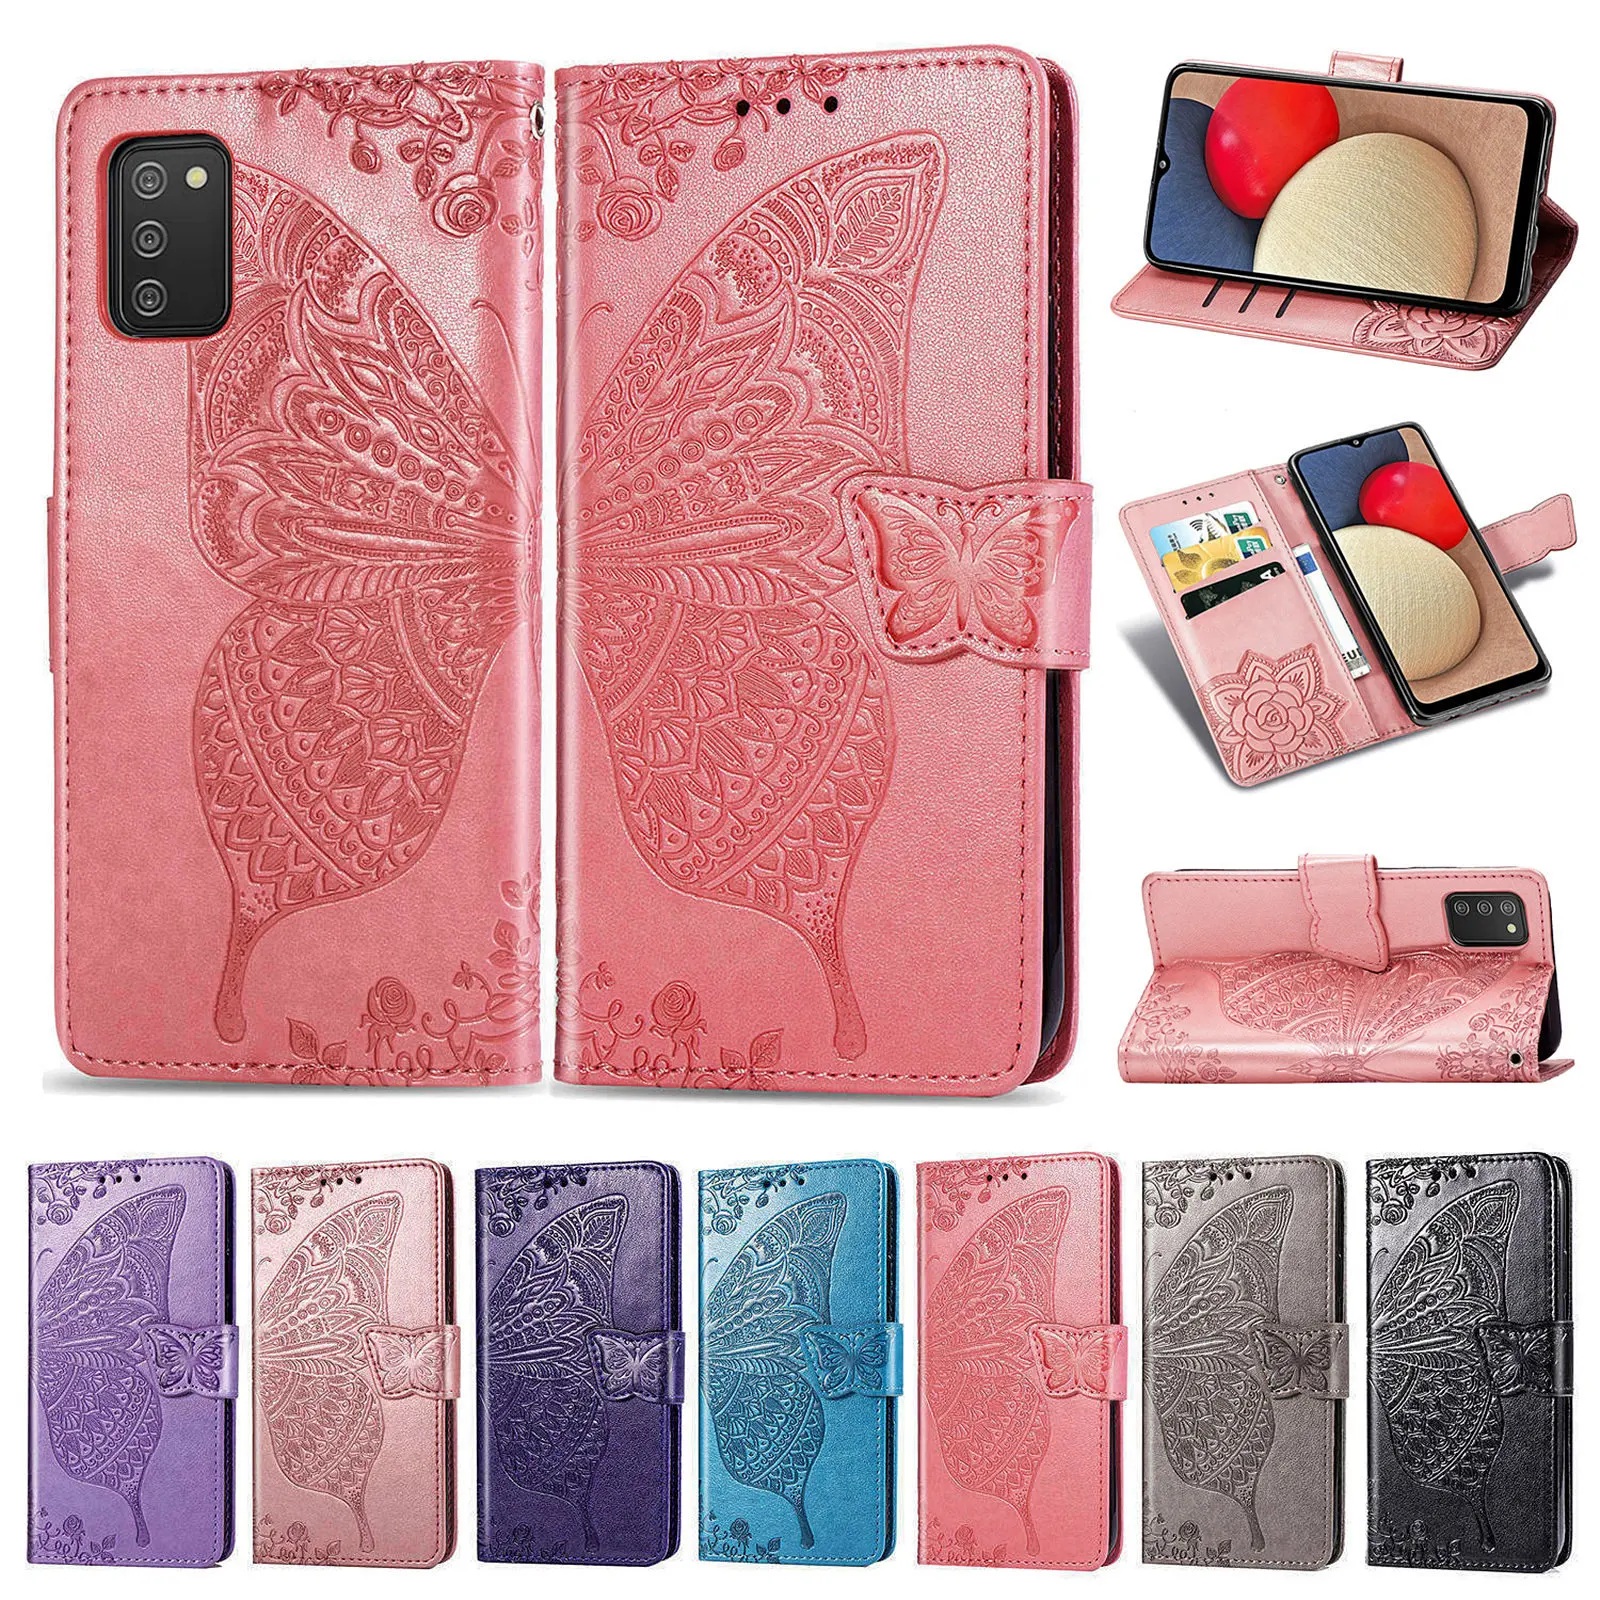 

Case For Samsung S30 F41 A02S M12 A72 A52 A32 A12 M51 M31s A41 A51 A21 A01 Note 20 Plus Ultra Luxury PU Leather Wallet Cover Bag